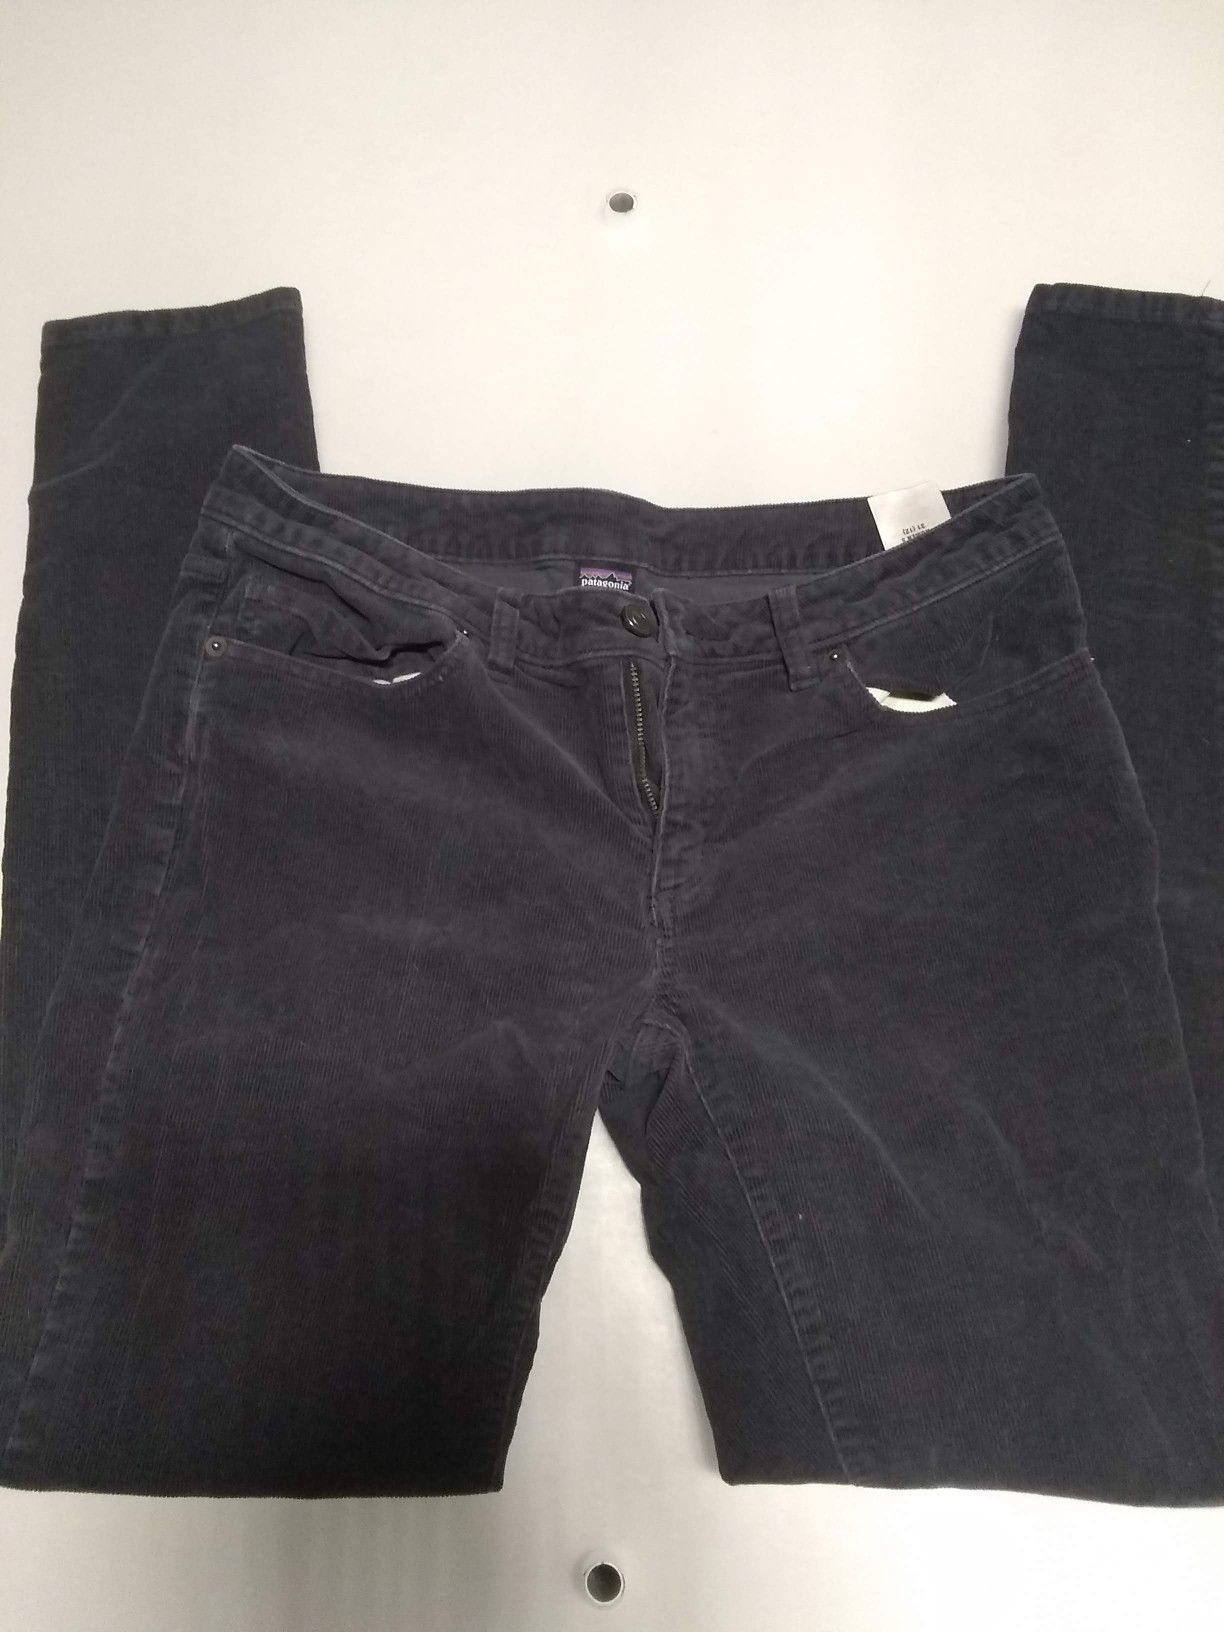 Patagonia gray Courderoy pants size 31